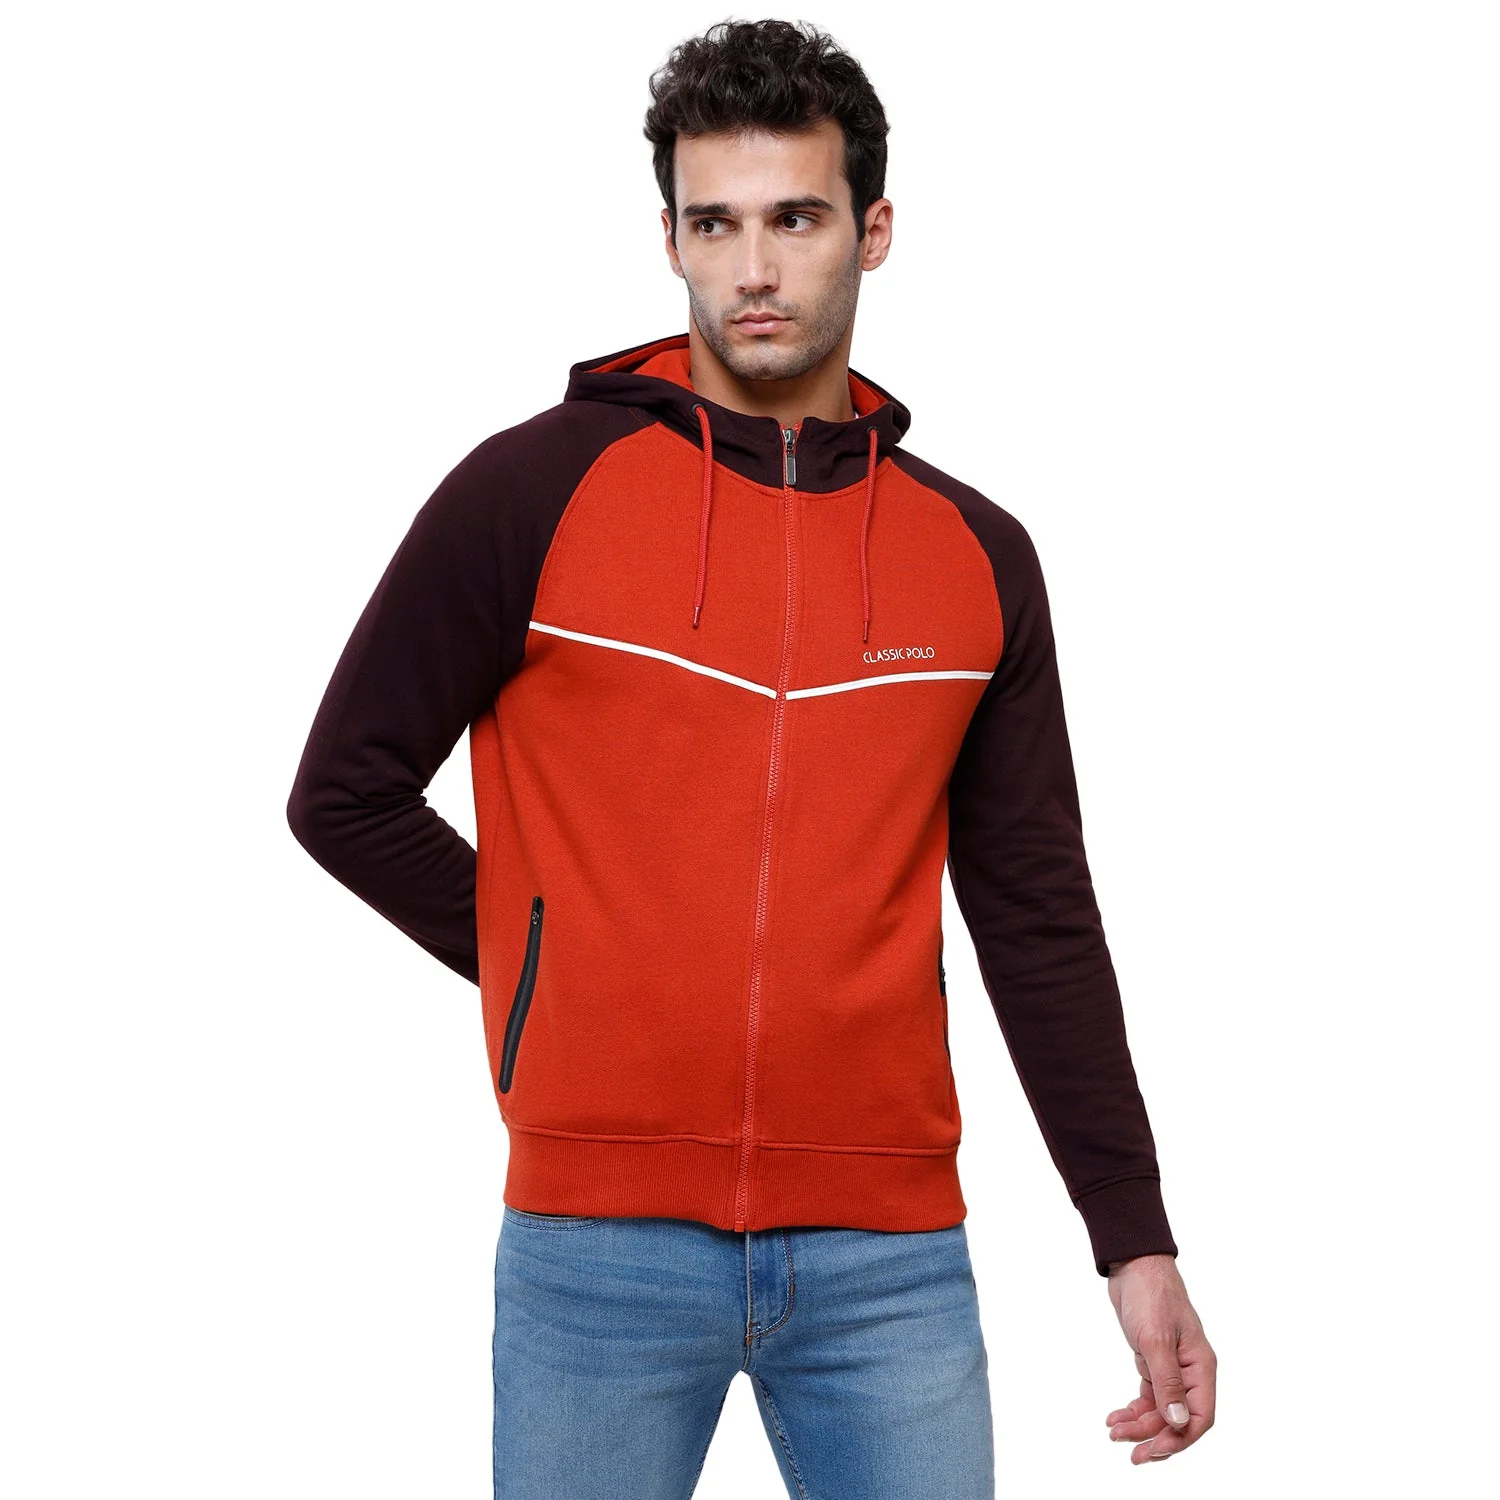 Classic Polo Men's Color Block Full Sleeve Red & Black Hooded Sweat Shirt - CPSS-331B